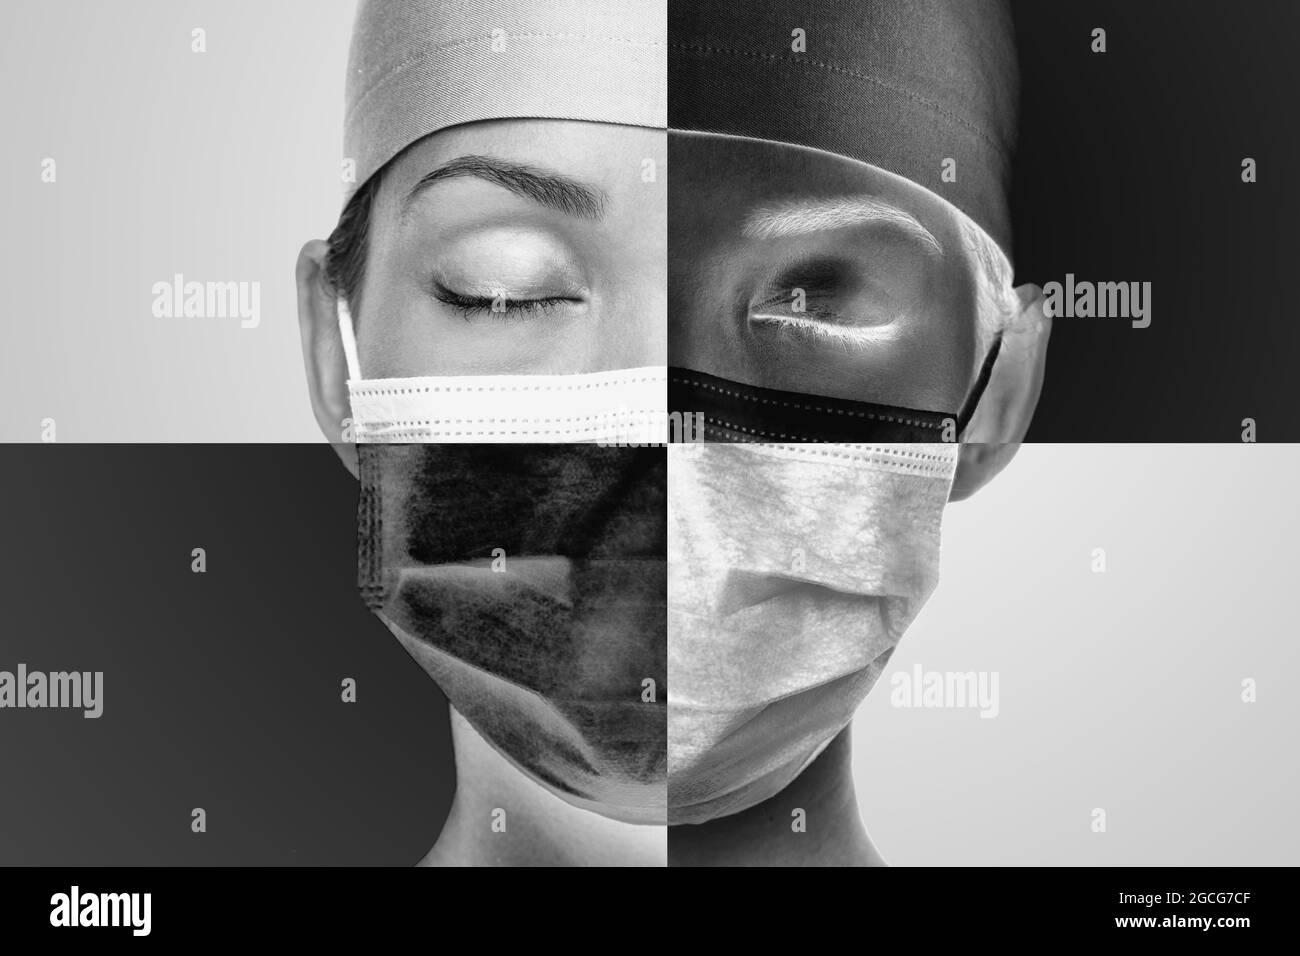 Coronavirus face mask Asian medical doctor tired depressed. Divide polarity of each side. Vaccination, healthcare, pandemic problems Stock Photo